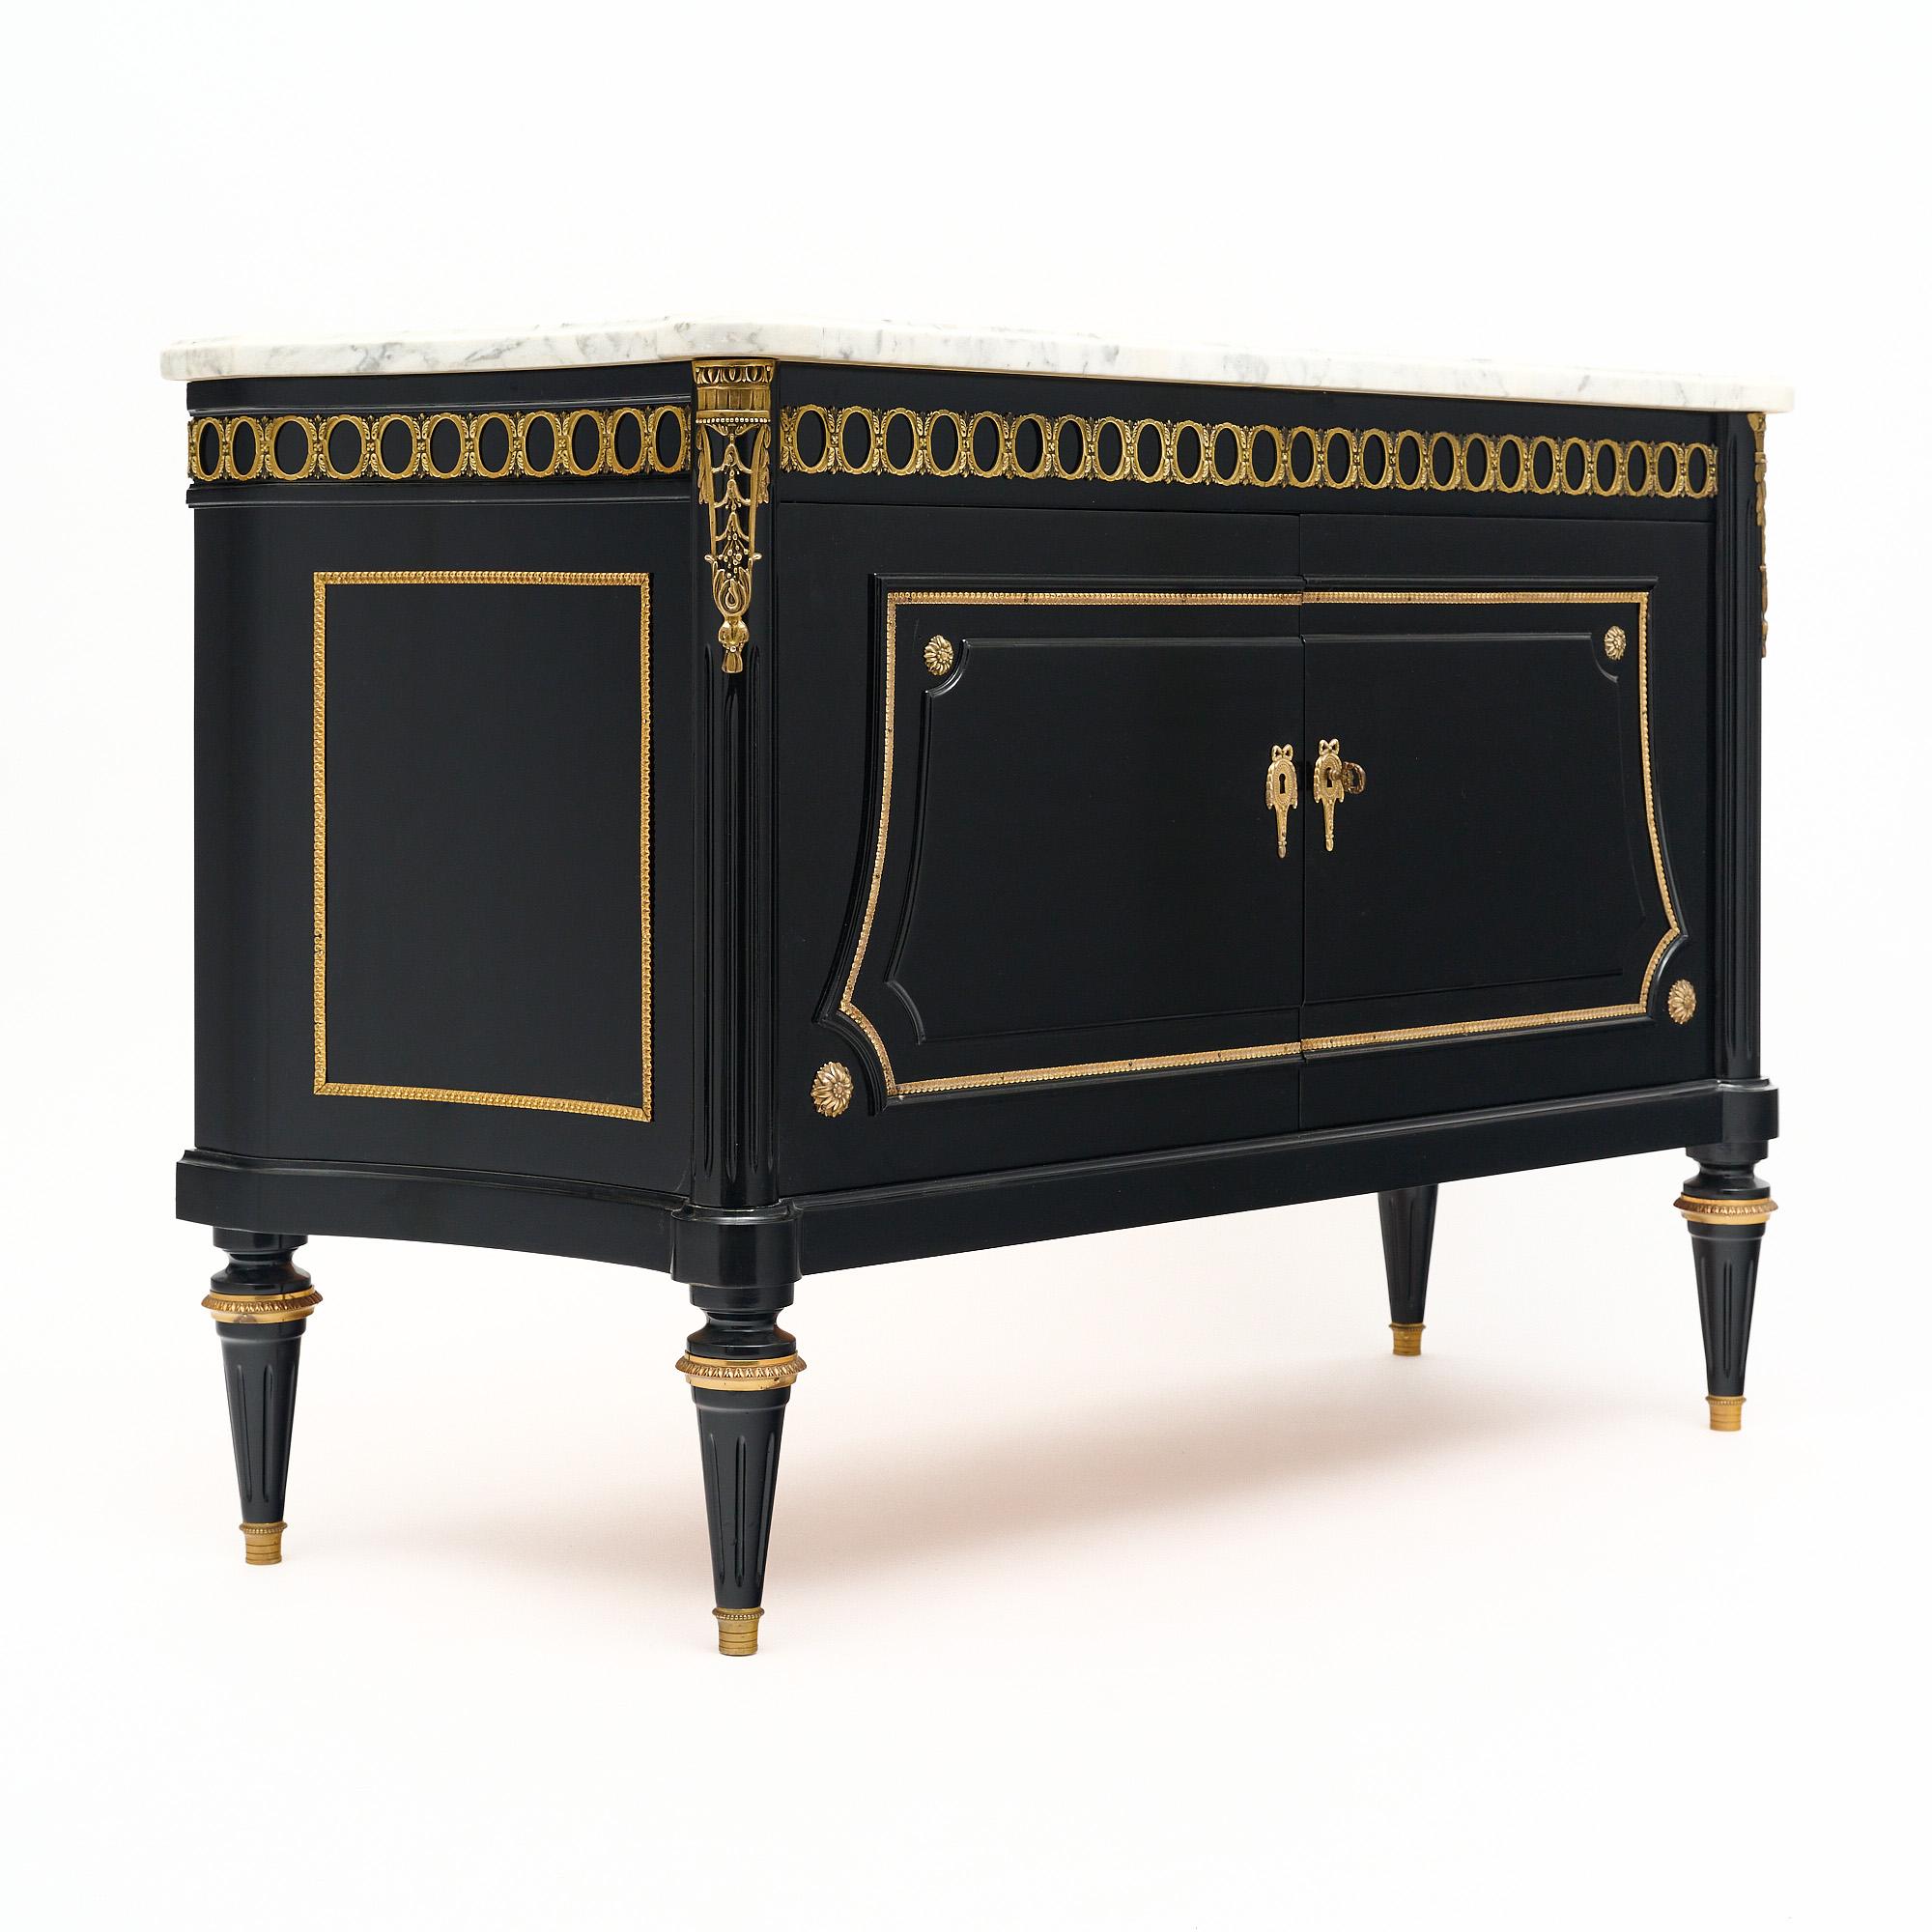 Small buffet in the Louis XVI style from France. This piece has been ebonized and finished with a lustrous museum-quality French polish with gilded ormulu throughout. Two doors open to interior shelving and the whole case piece is adorned with gilt